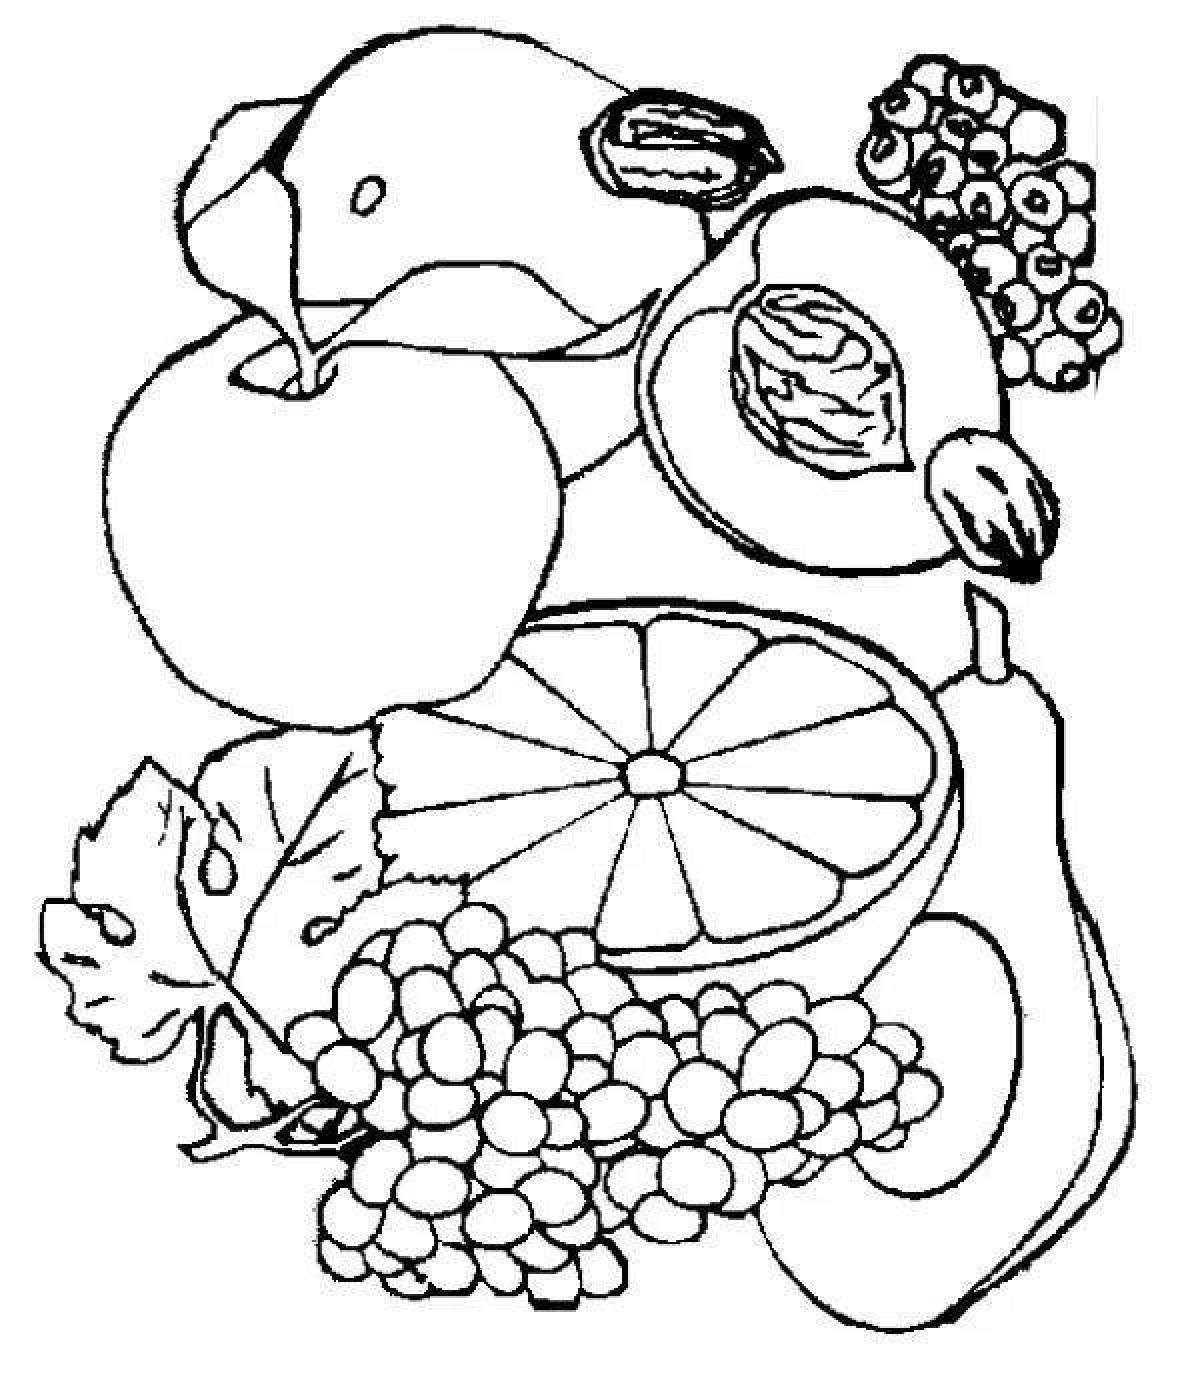 Complex coloring book about proper nutrition